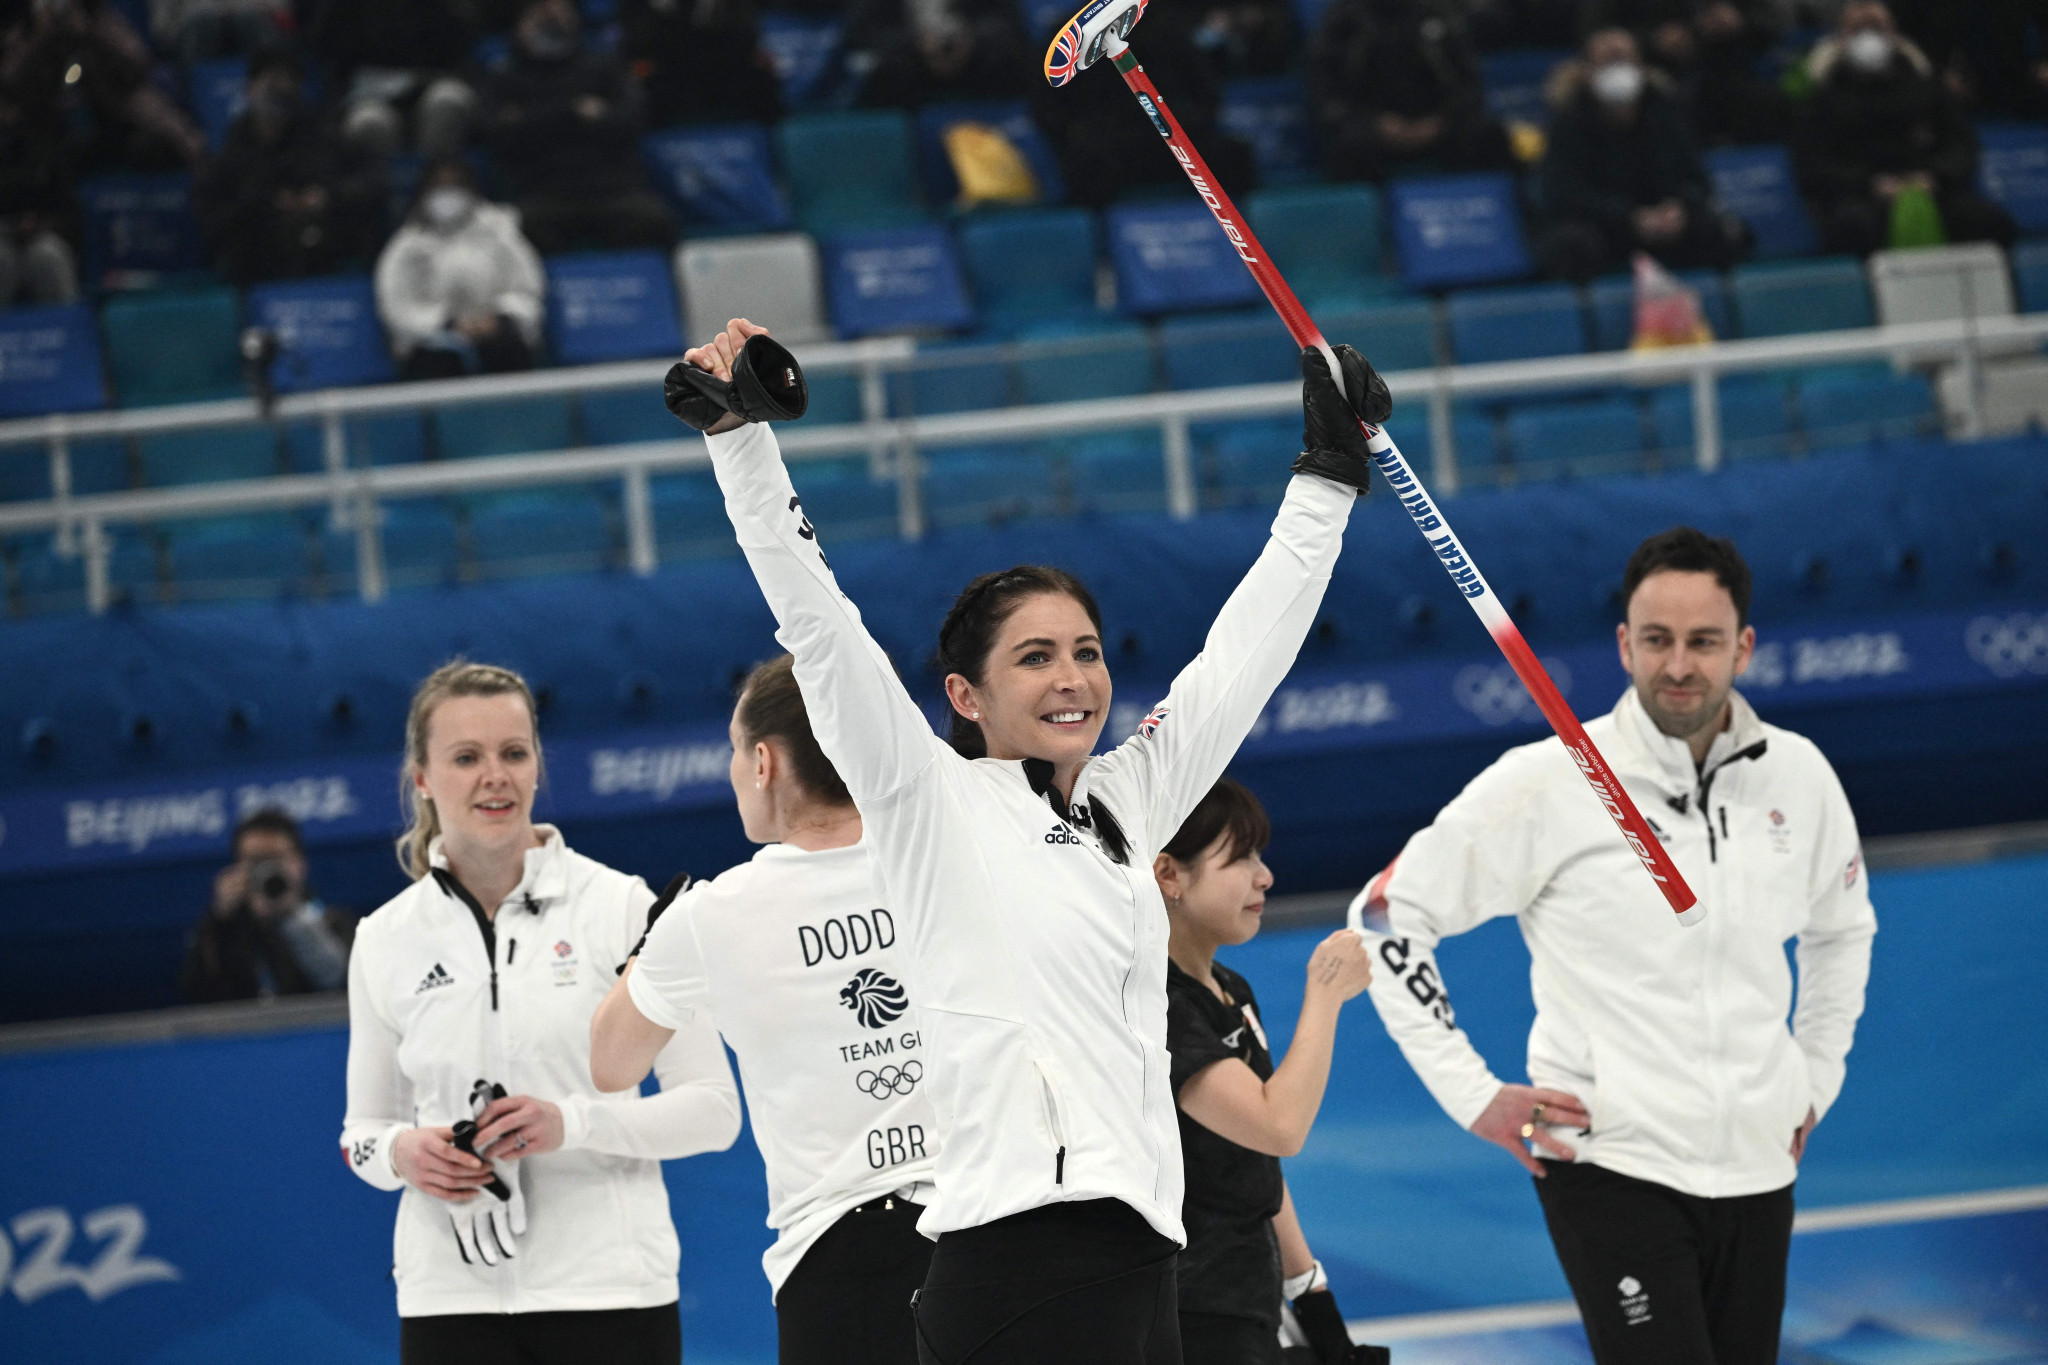 Britain's only medals at the Beijing 2022 Olympics came in the curling events ©Getty Images